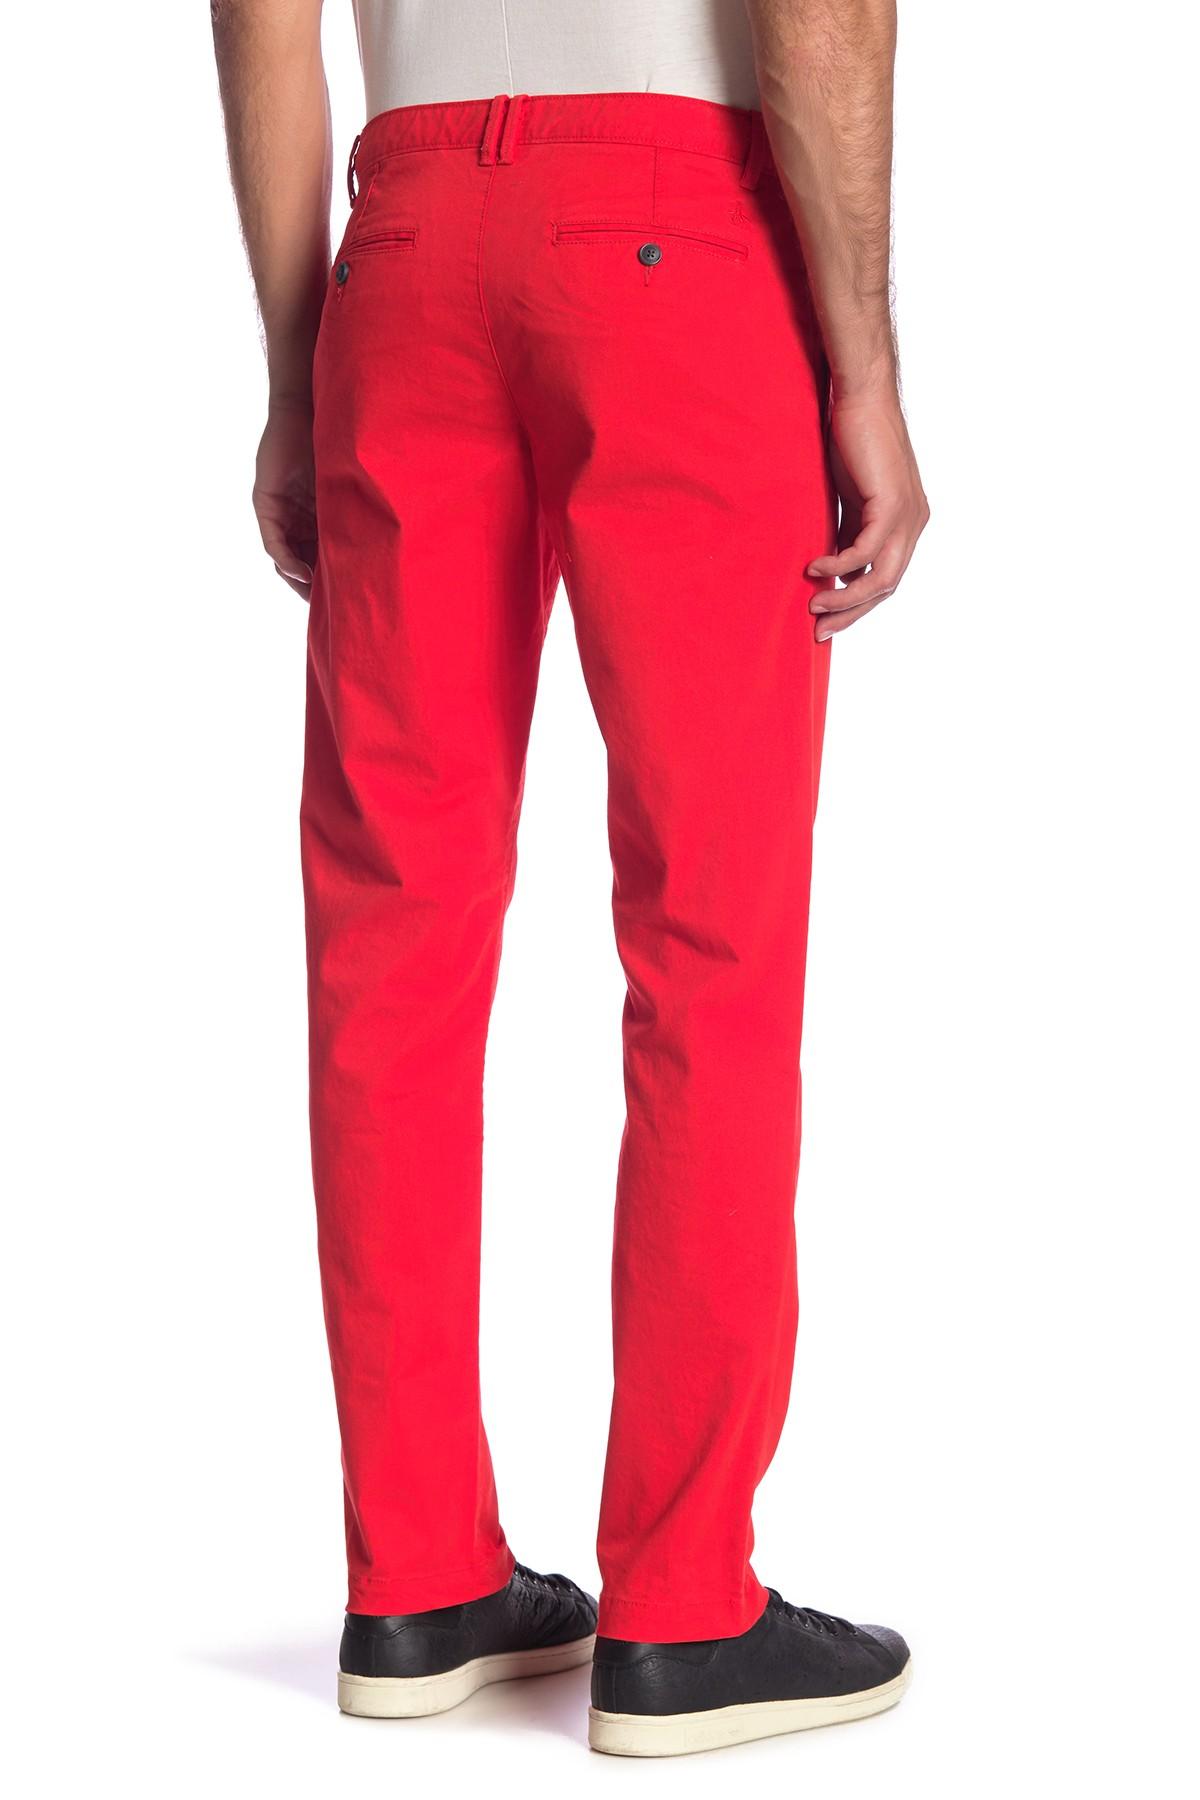 Original Penguin Cotton Slim Stretch Chino Pants in Red for Men - Lyst